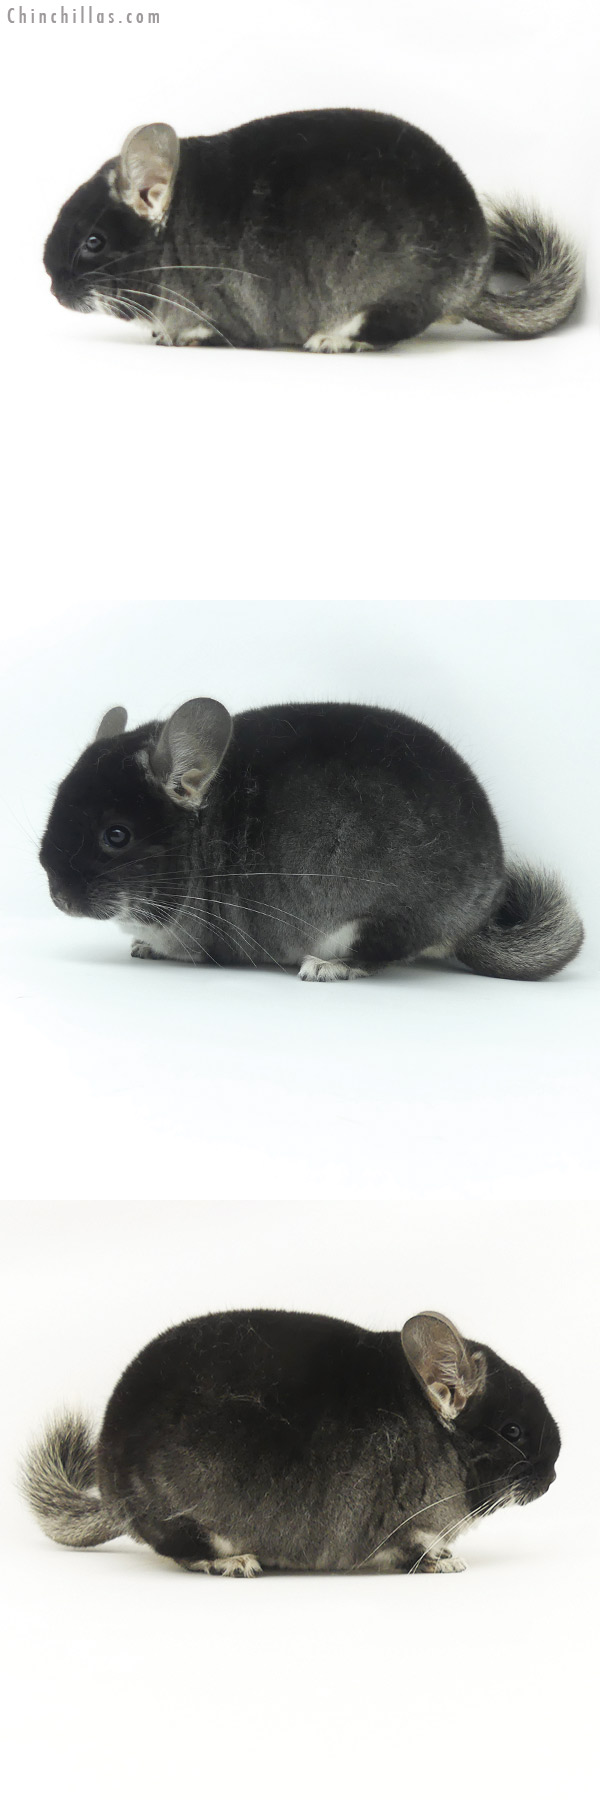 Chinchilla or related item offered for sale or export on Chinchillas.com - 20131 Blocky Brevi Type Herd Improvement Quality Black Velvet Male Chinchilla